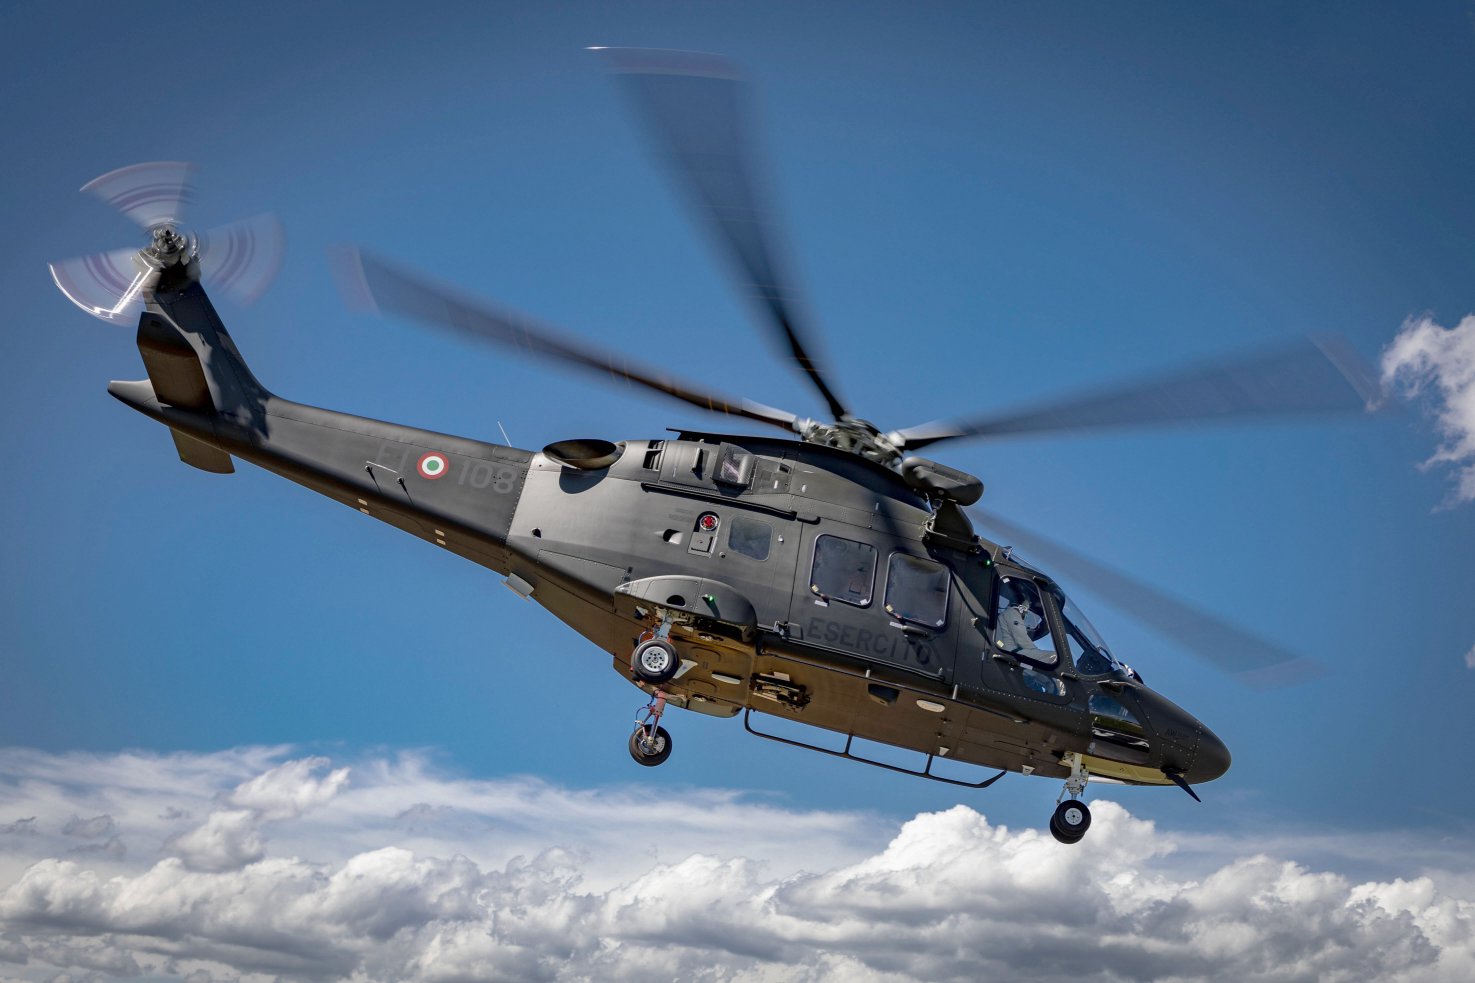 Austria will procure 18 AW169M helicopters in co-operation with Italy. (Bundesheer Fotos)